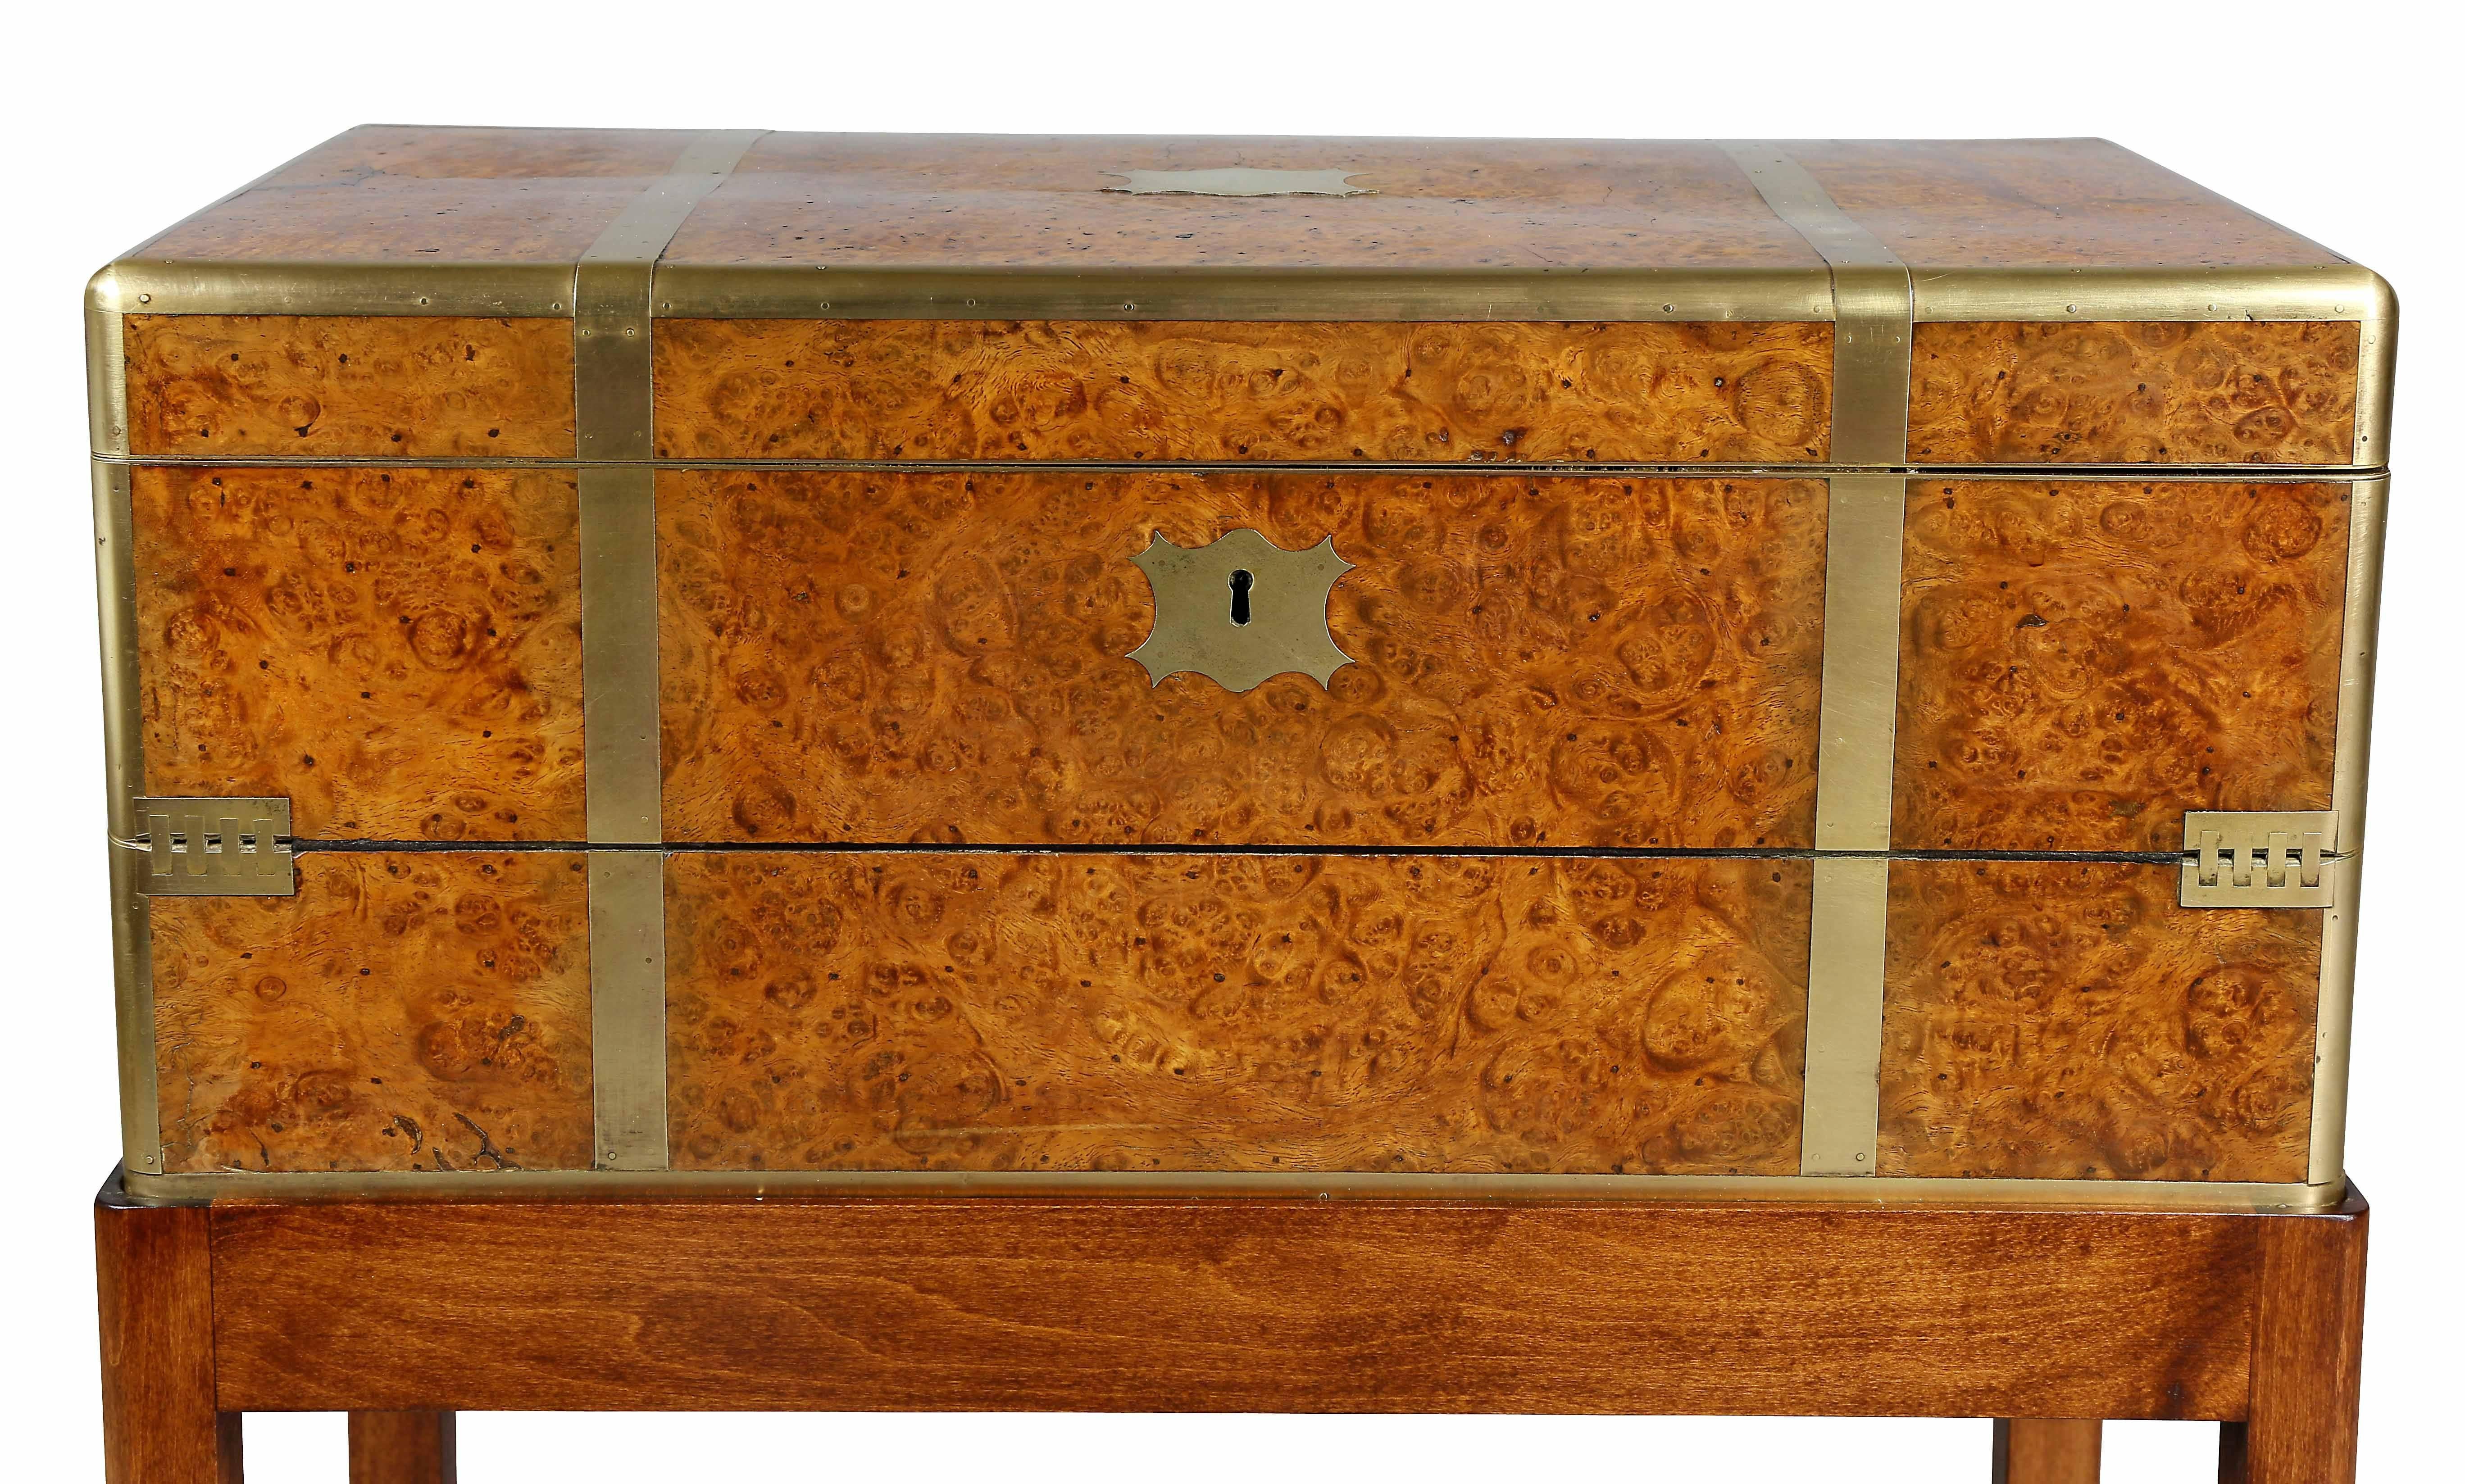 Rectangular with brass corners and trim opening to a desk with writing surface and fitted compartments, later base.